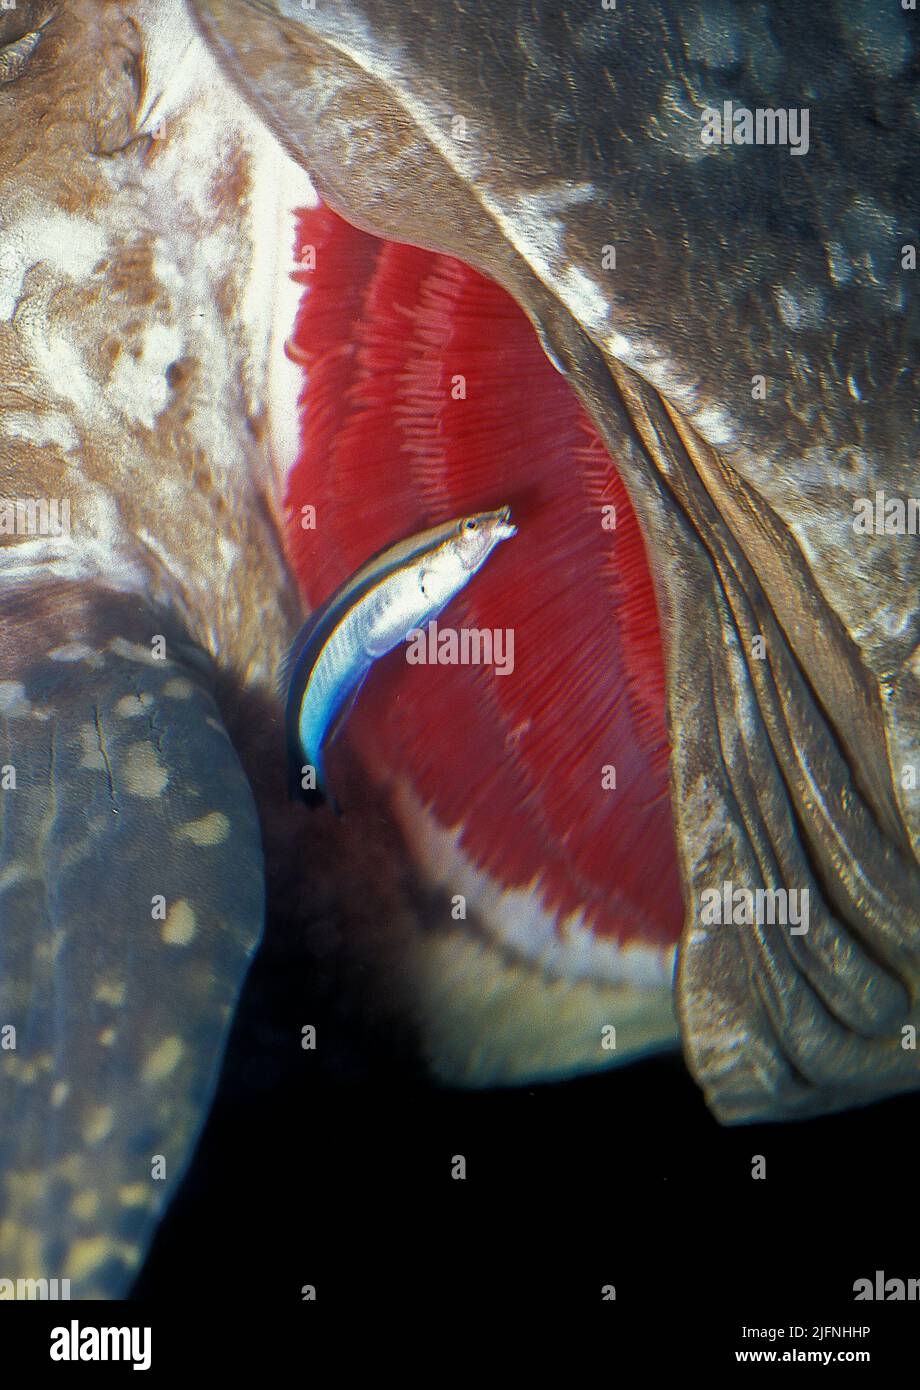 Cleaner Wrasse, Labroides dimidiatus, cleaning the gills of a big grouper. Stock Photo